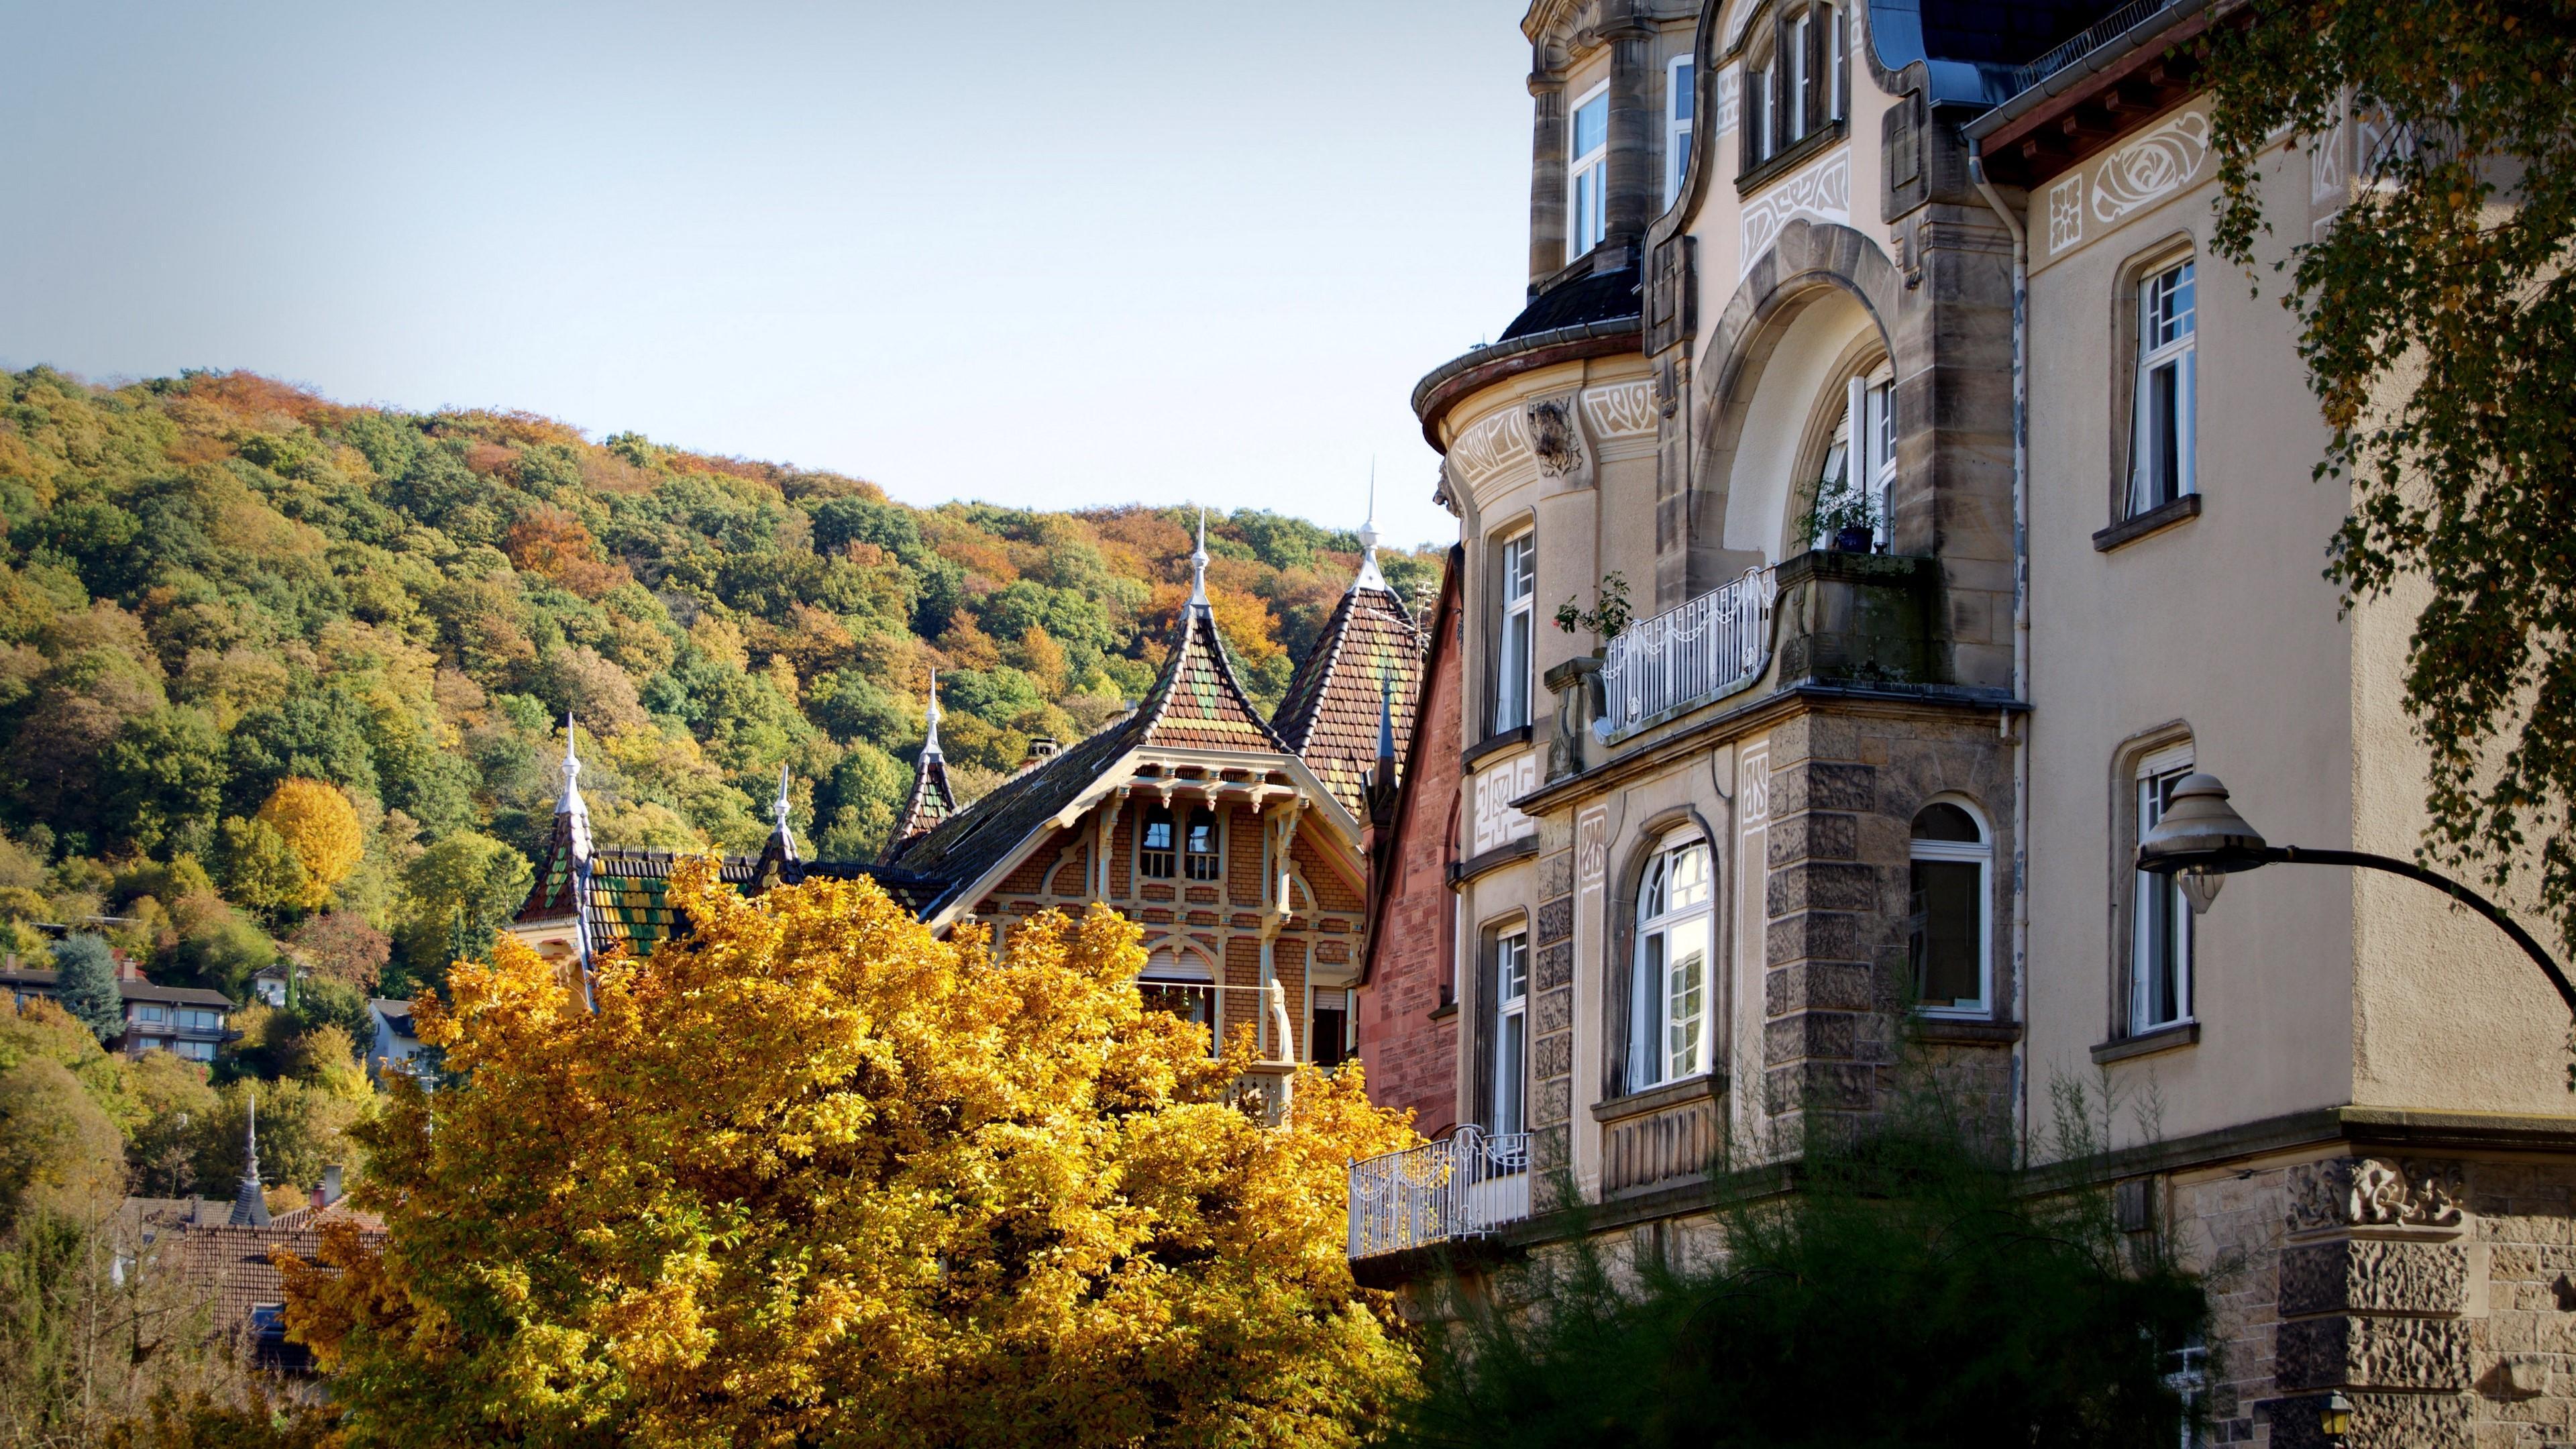 HD wallpaper, Forest 4K, Architecture, Autumn, Building, Heidelberg, Germany